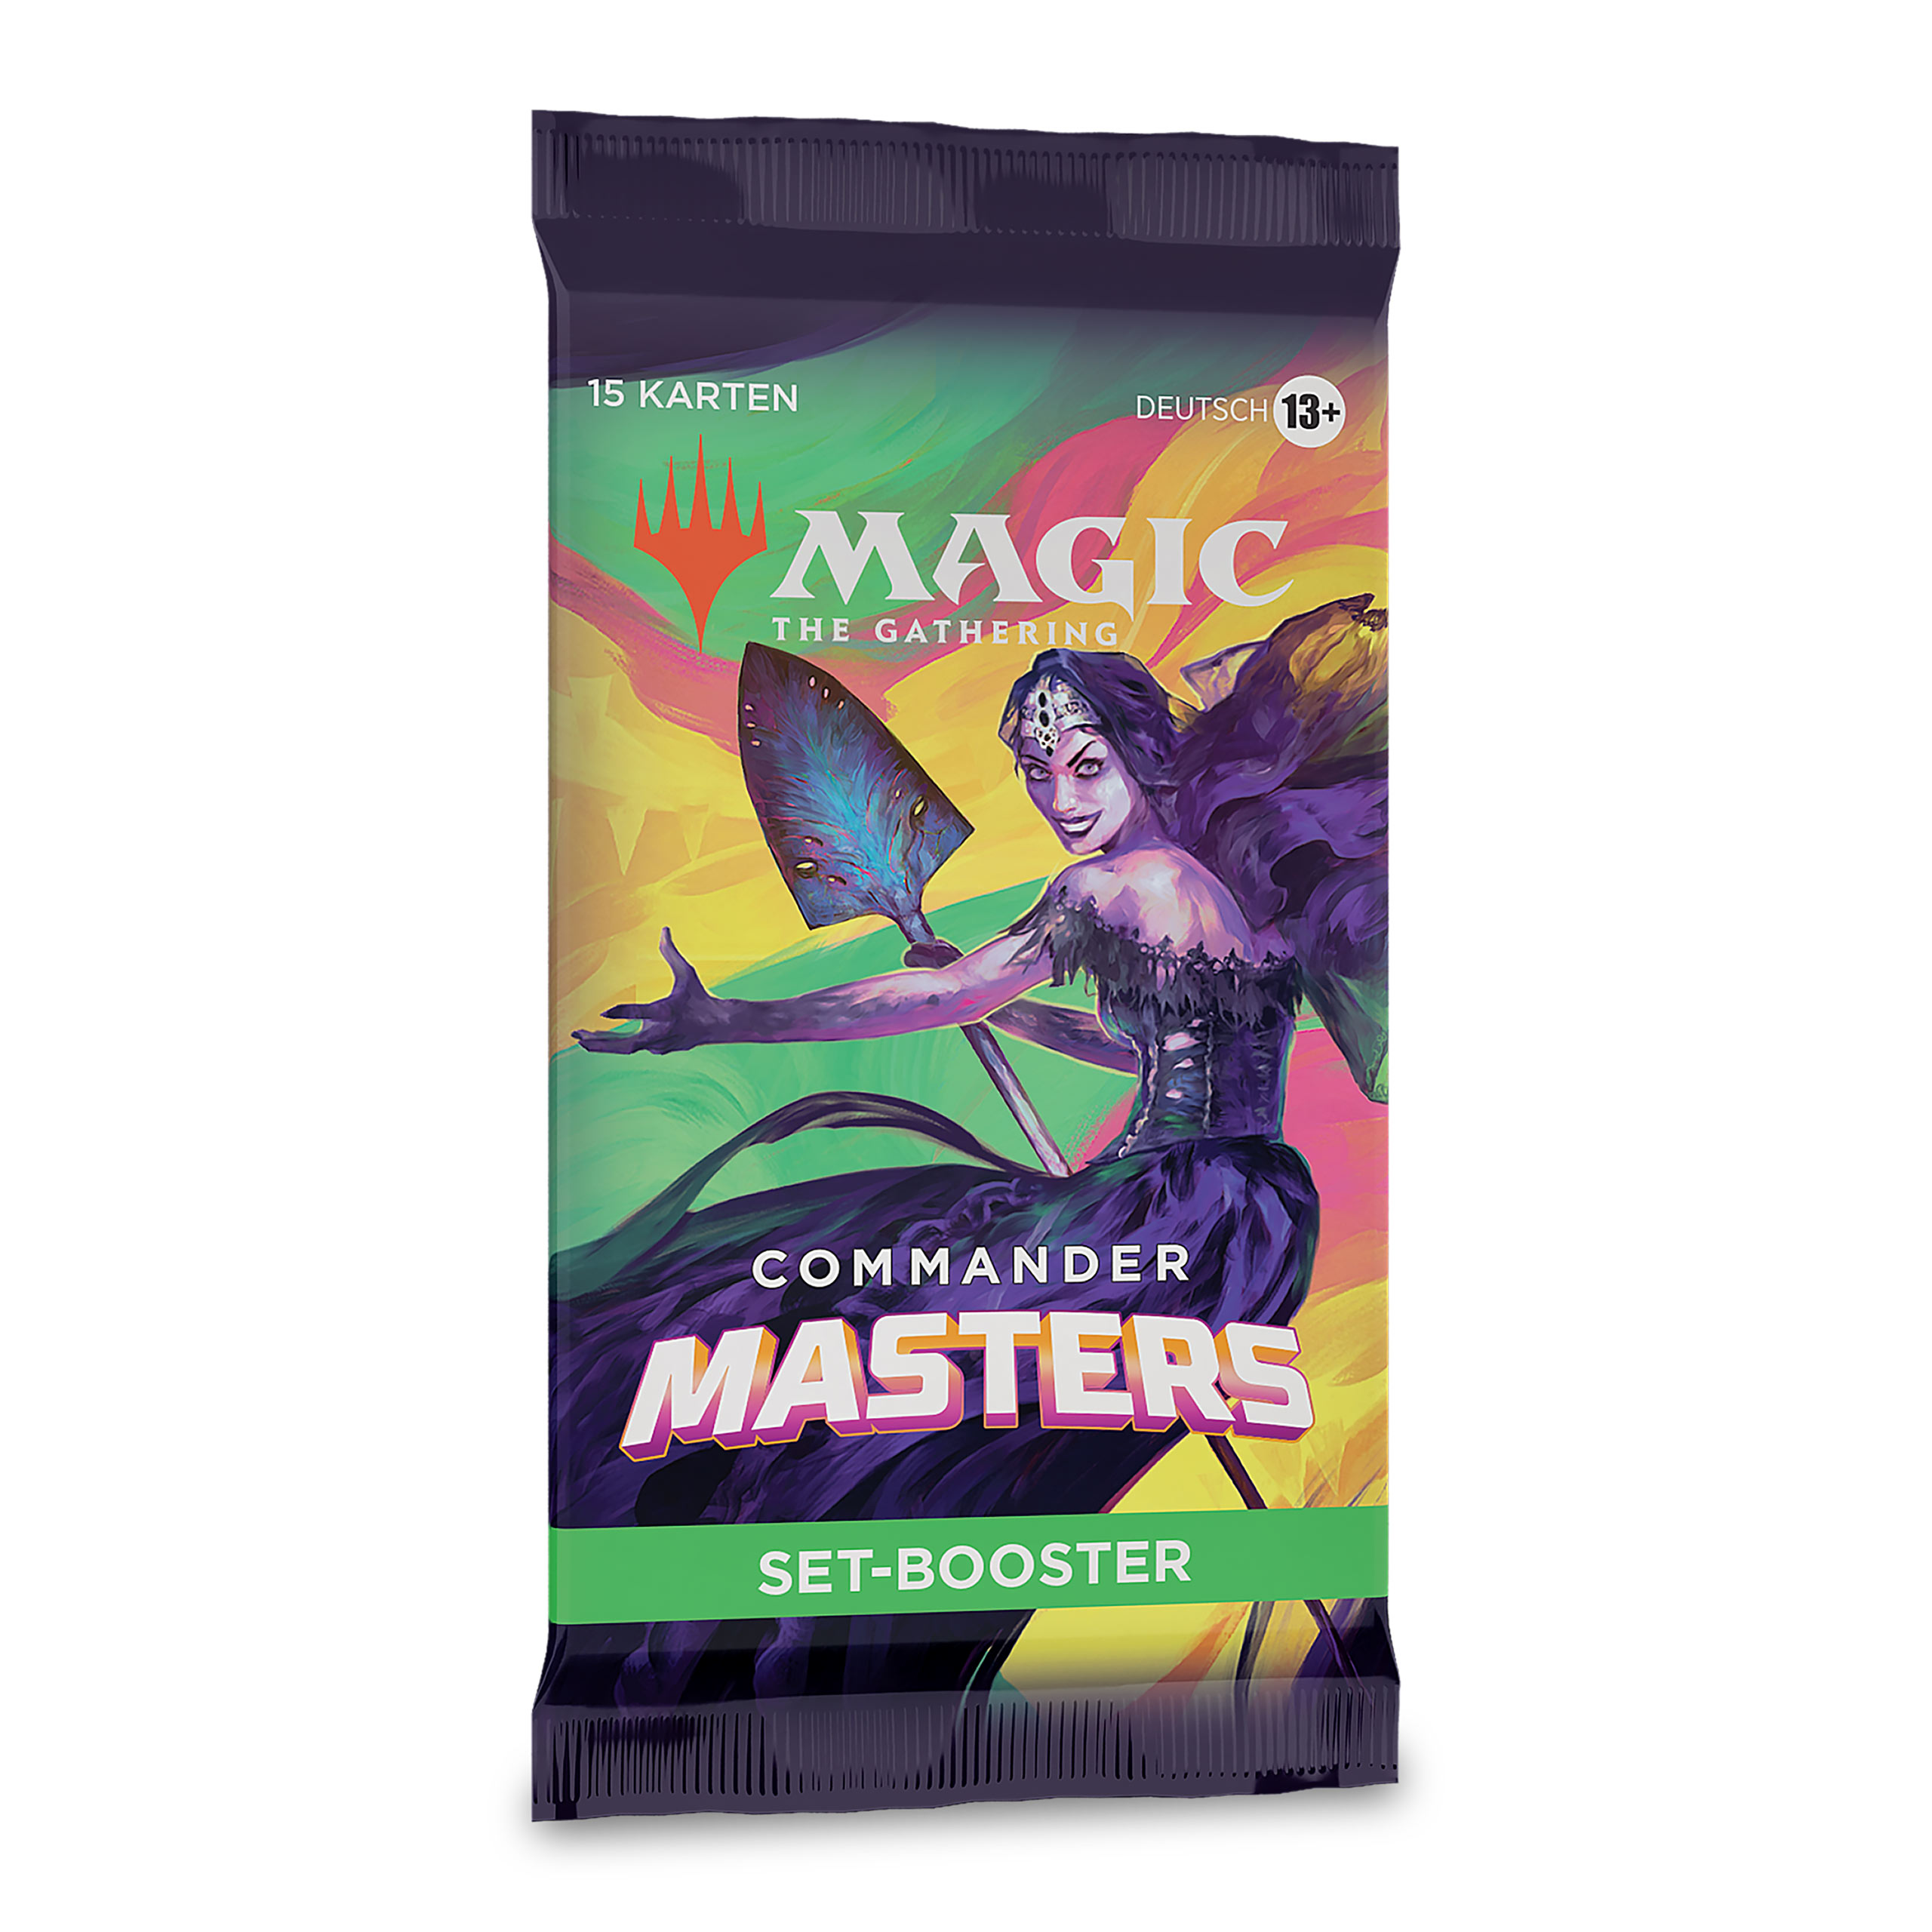 Commander Masters Set Booster - Magic The Gathering